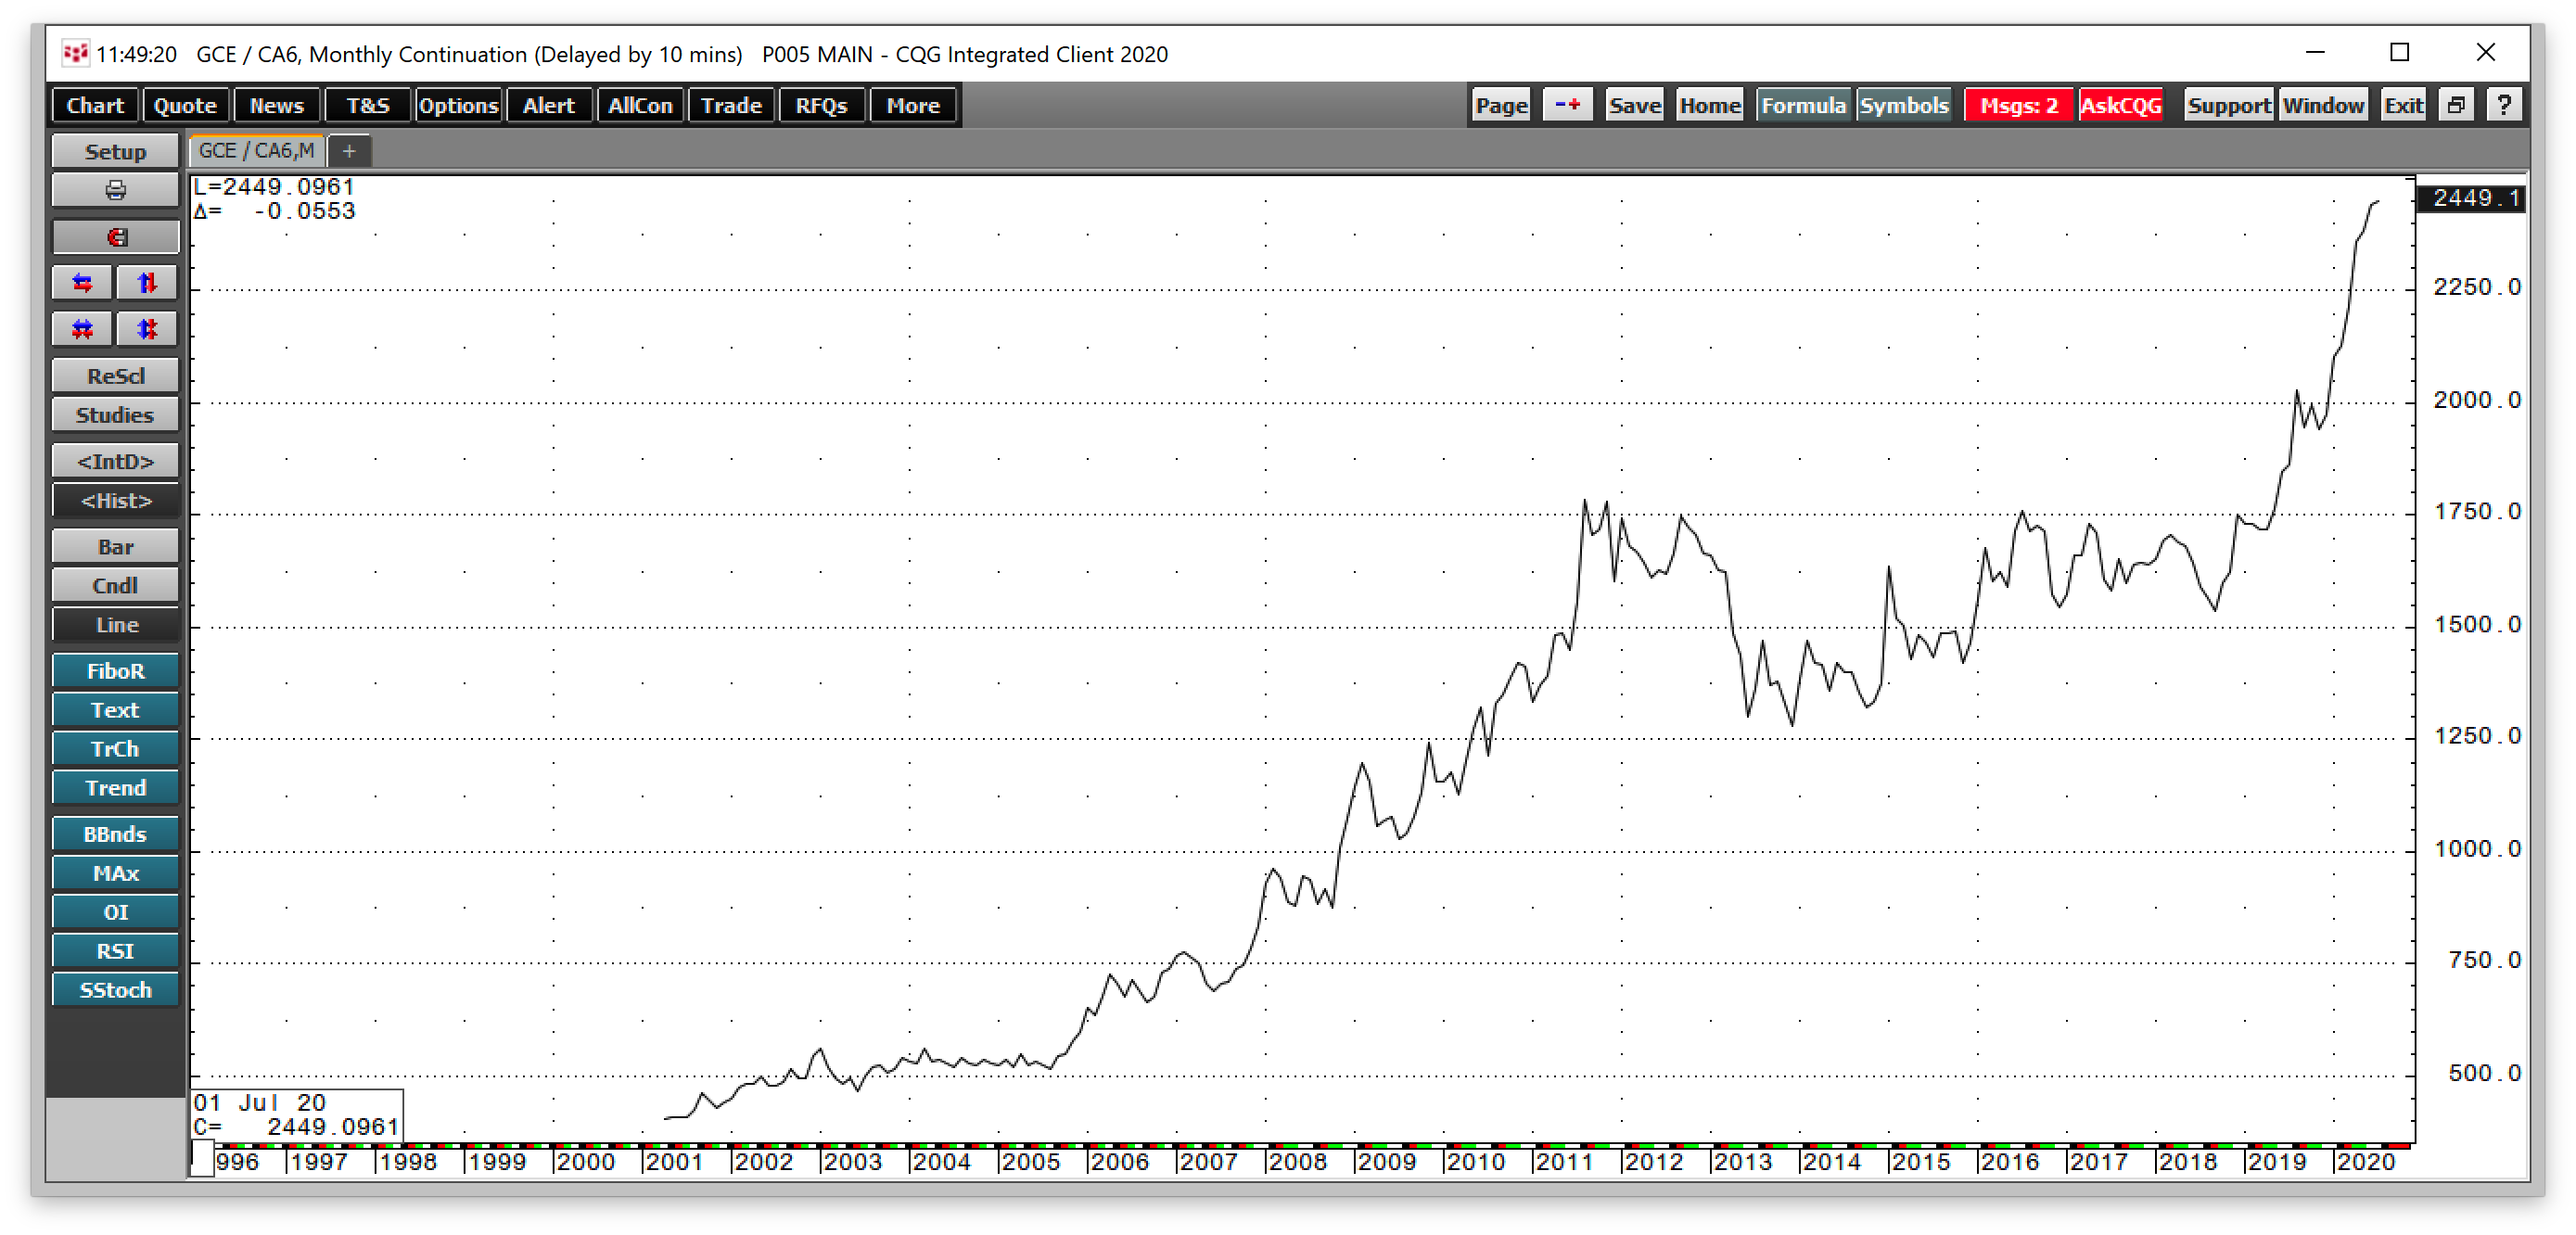 Gold/CAD Monthly 1997-2020